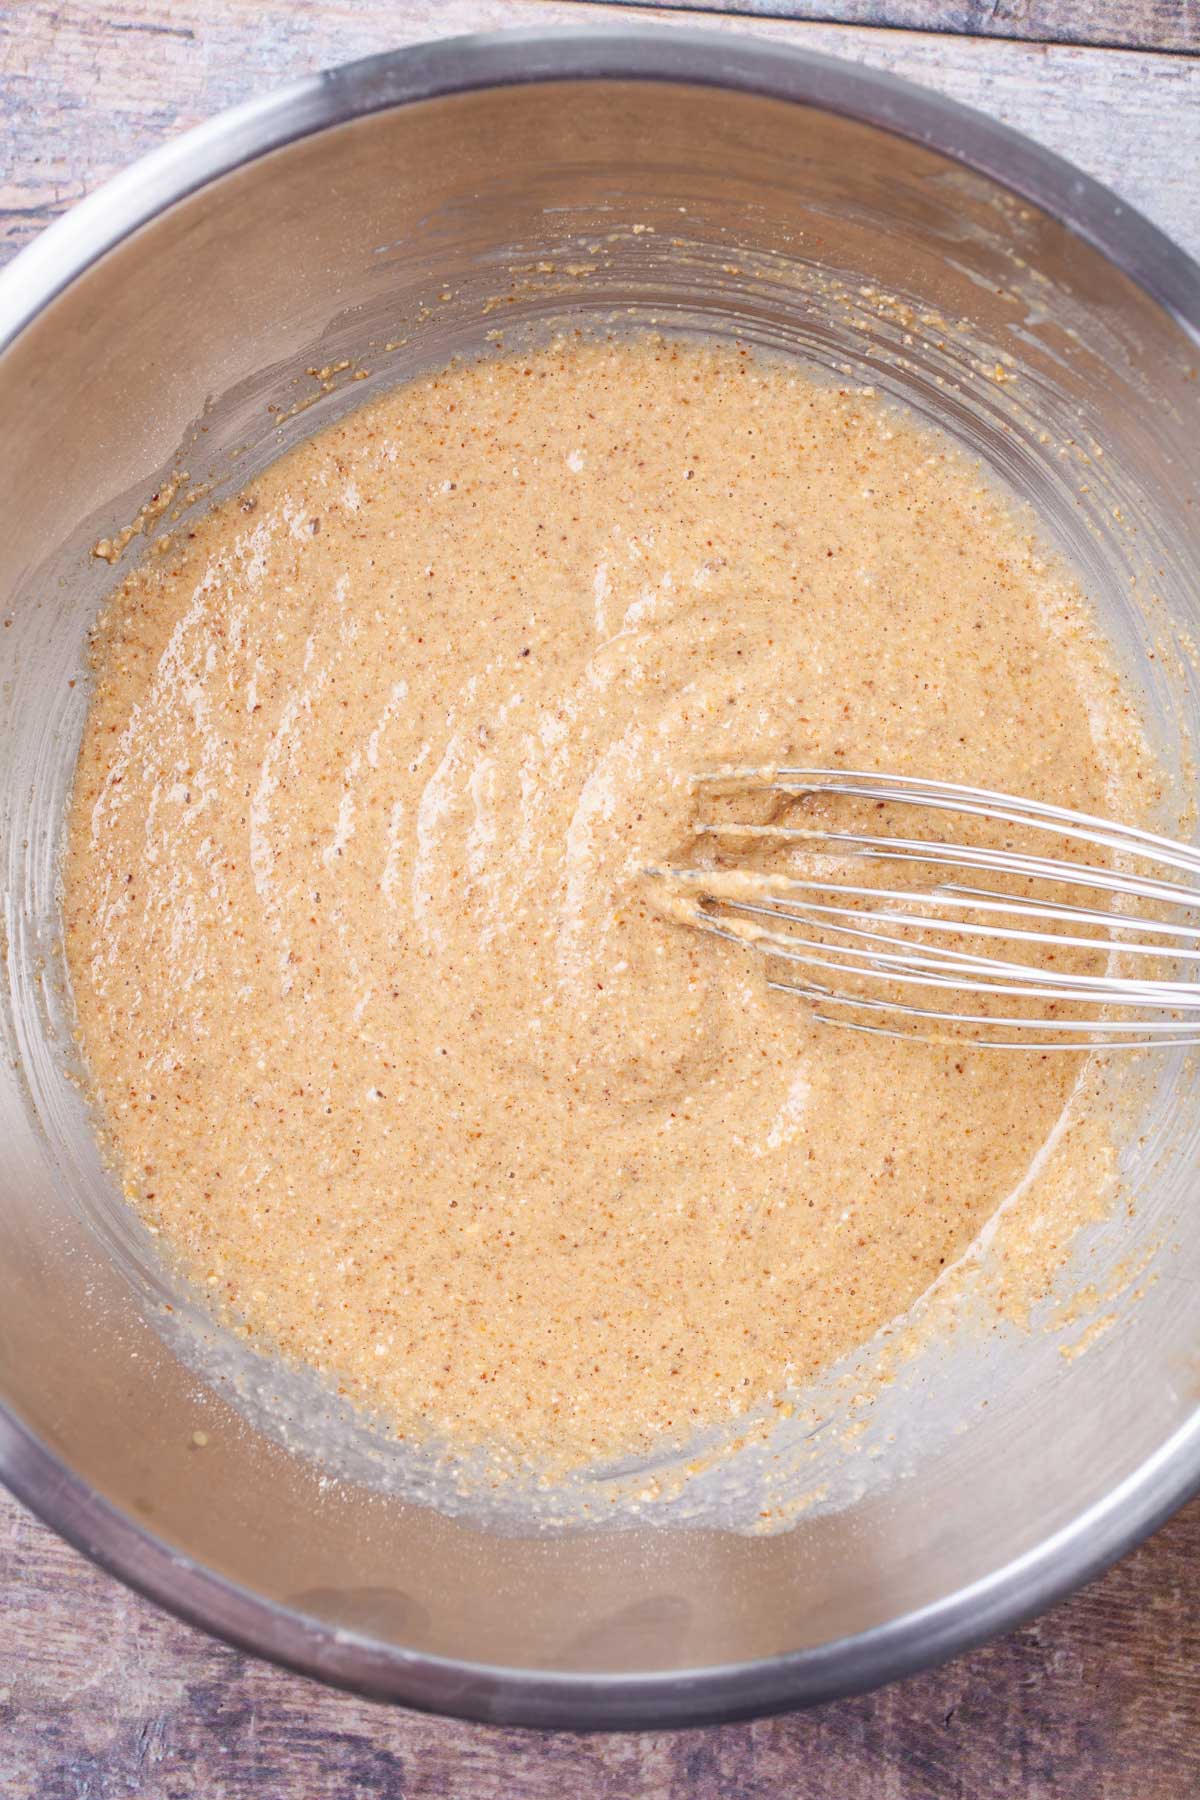 A whisk is resting in pancake batter. in a stainless steel bowl.